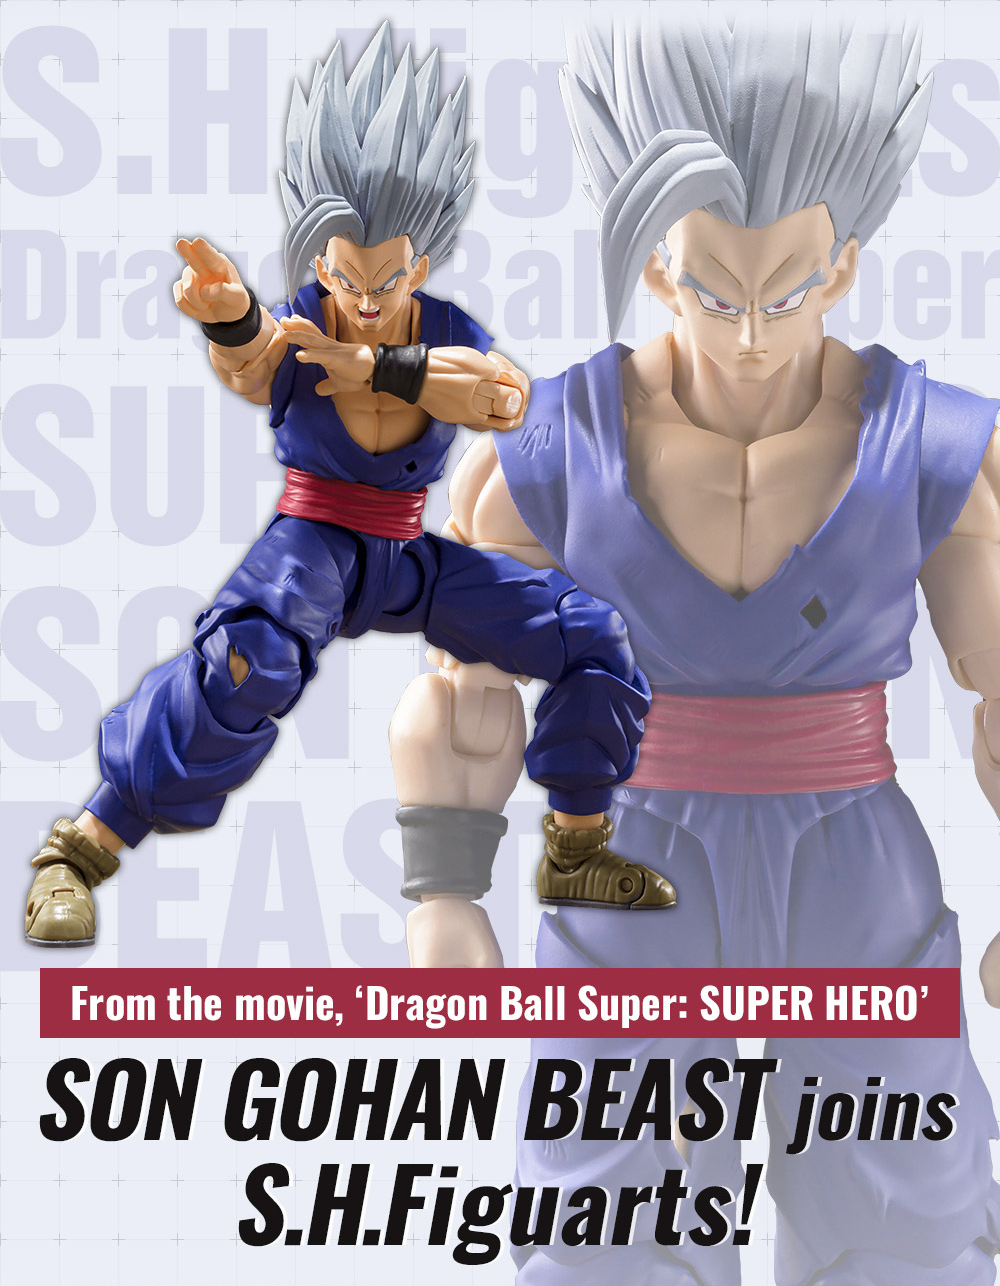 From the movie, ‘Dragon Ball Super: SUPER HERO’ SON GOHAN BEAST joins S.H.Figuarts!